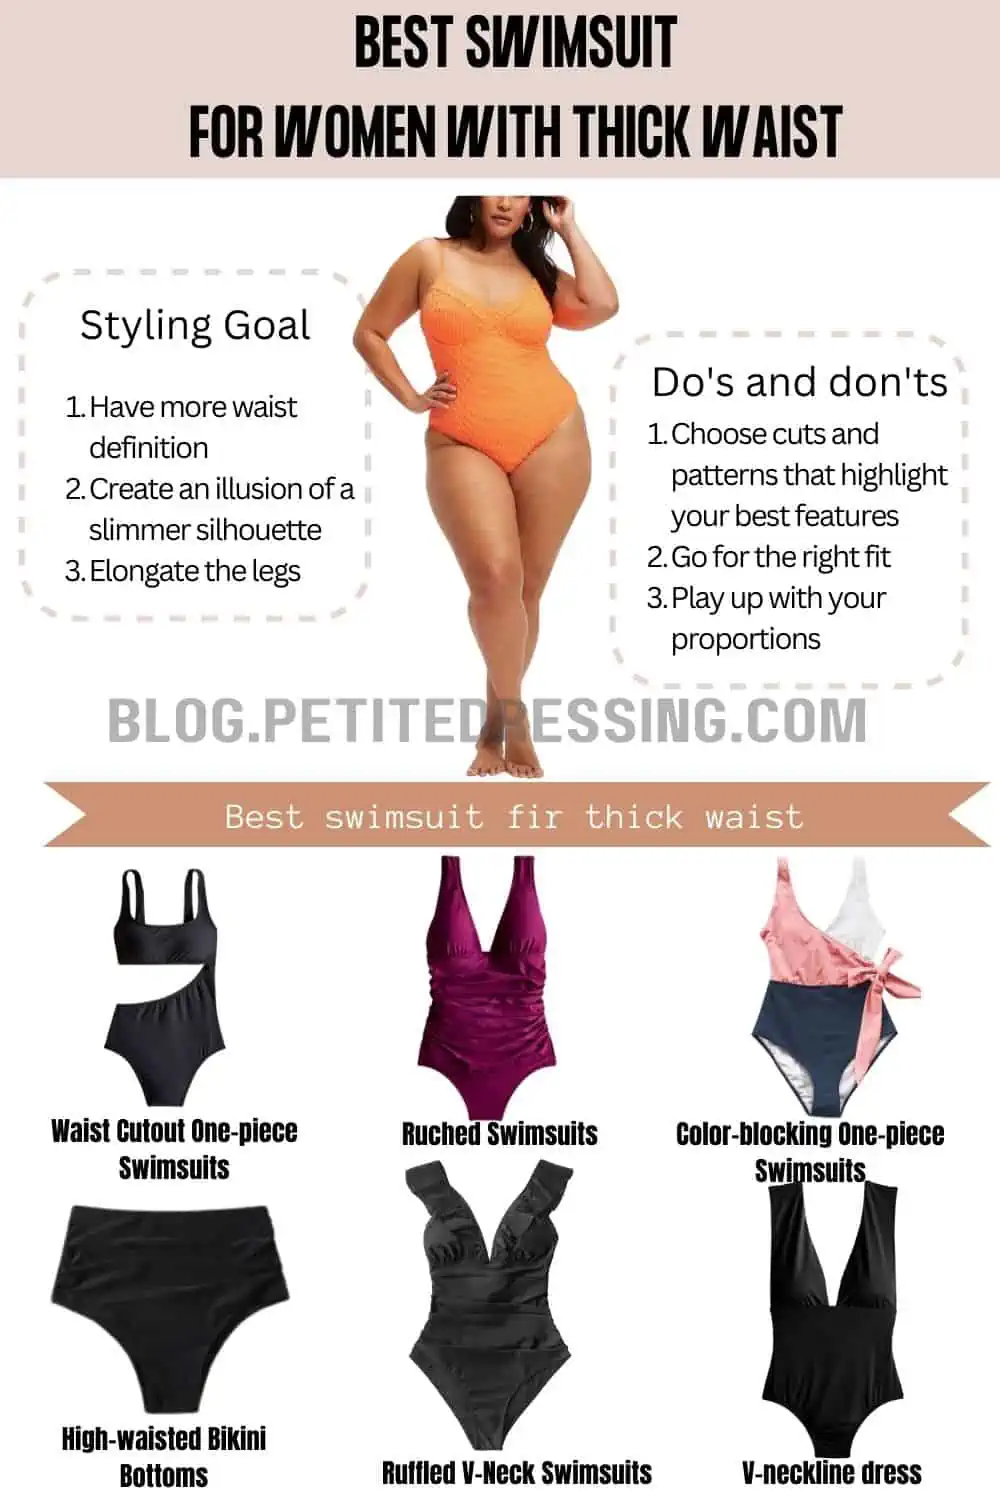 Swimsuit Guide for Women with Thick Waist - Petite Dressing